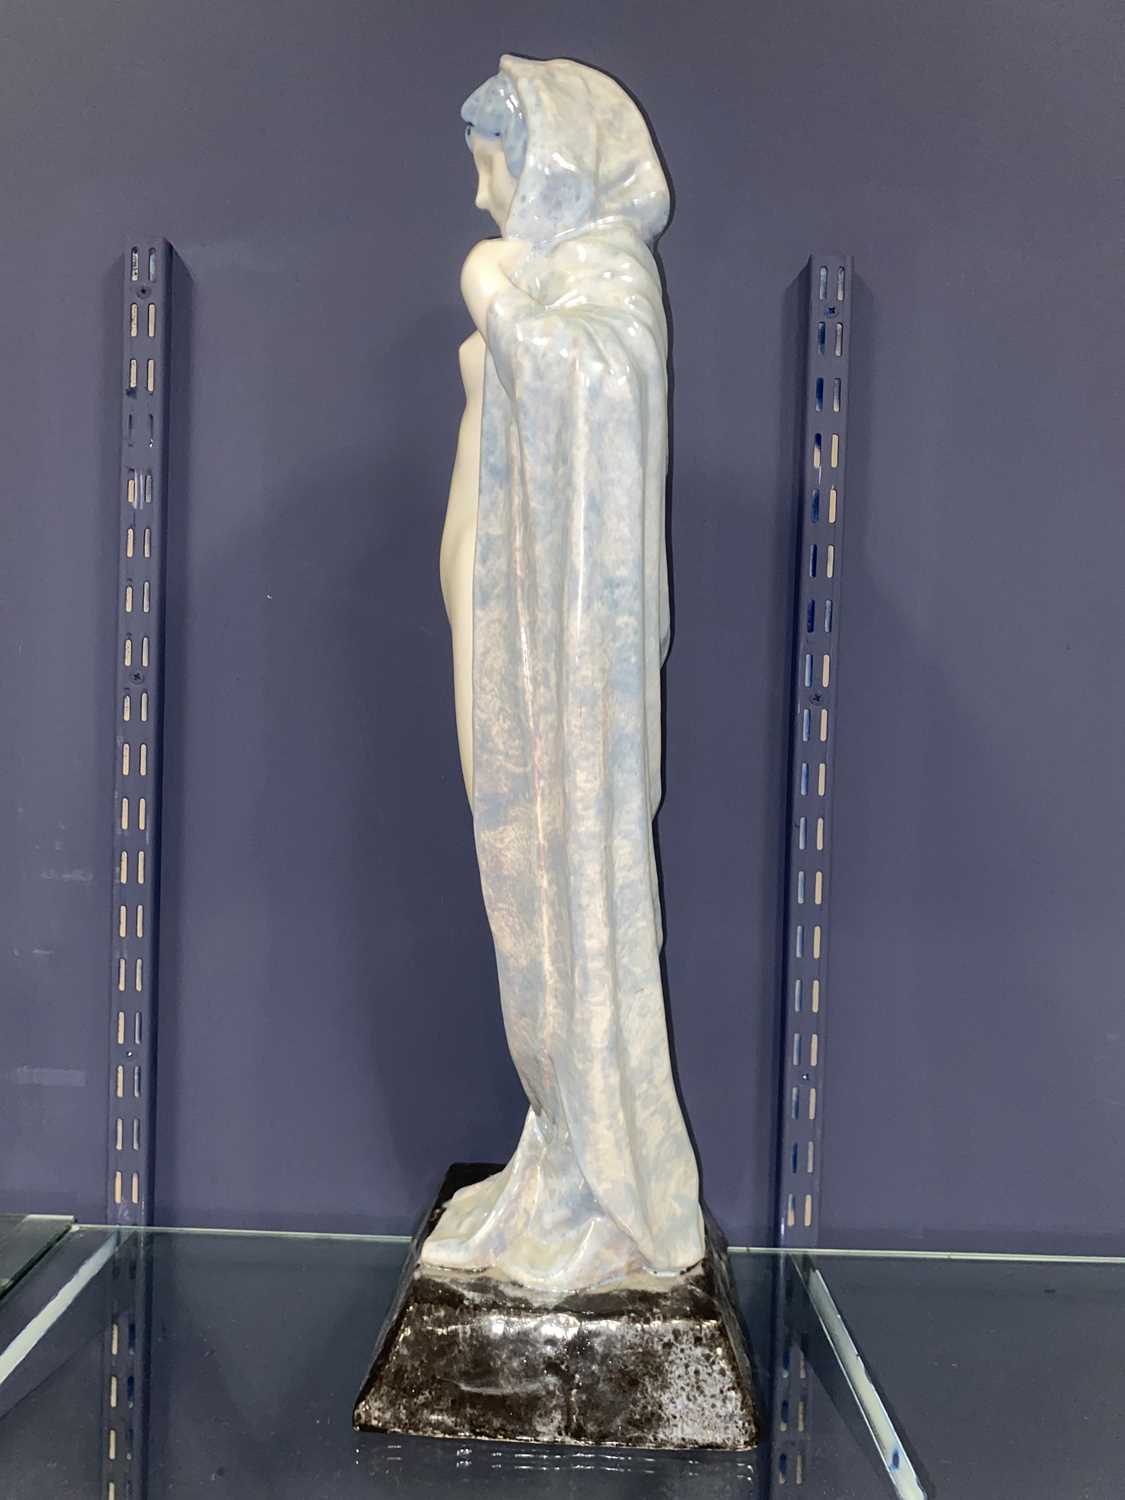 MARCEL GUILLARD FOR EDITIONS ETLING OF PARIS, CERAMIC NUDE OF A LADY, CIRCA 1920 - Image 10 of 14